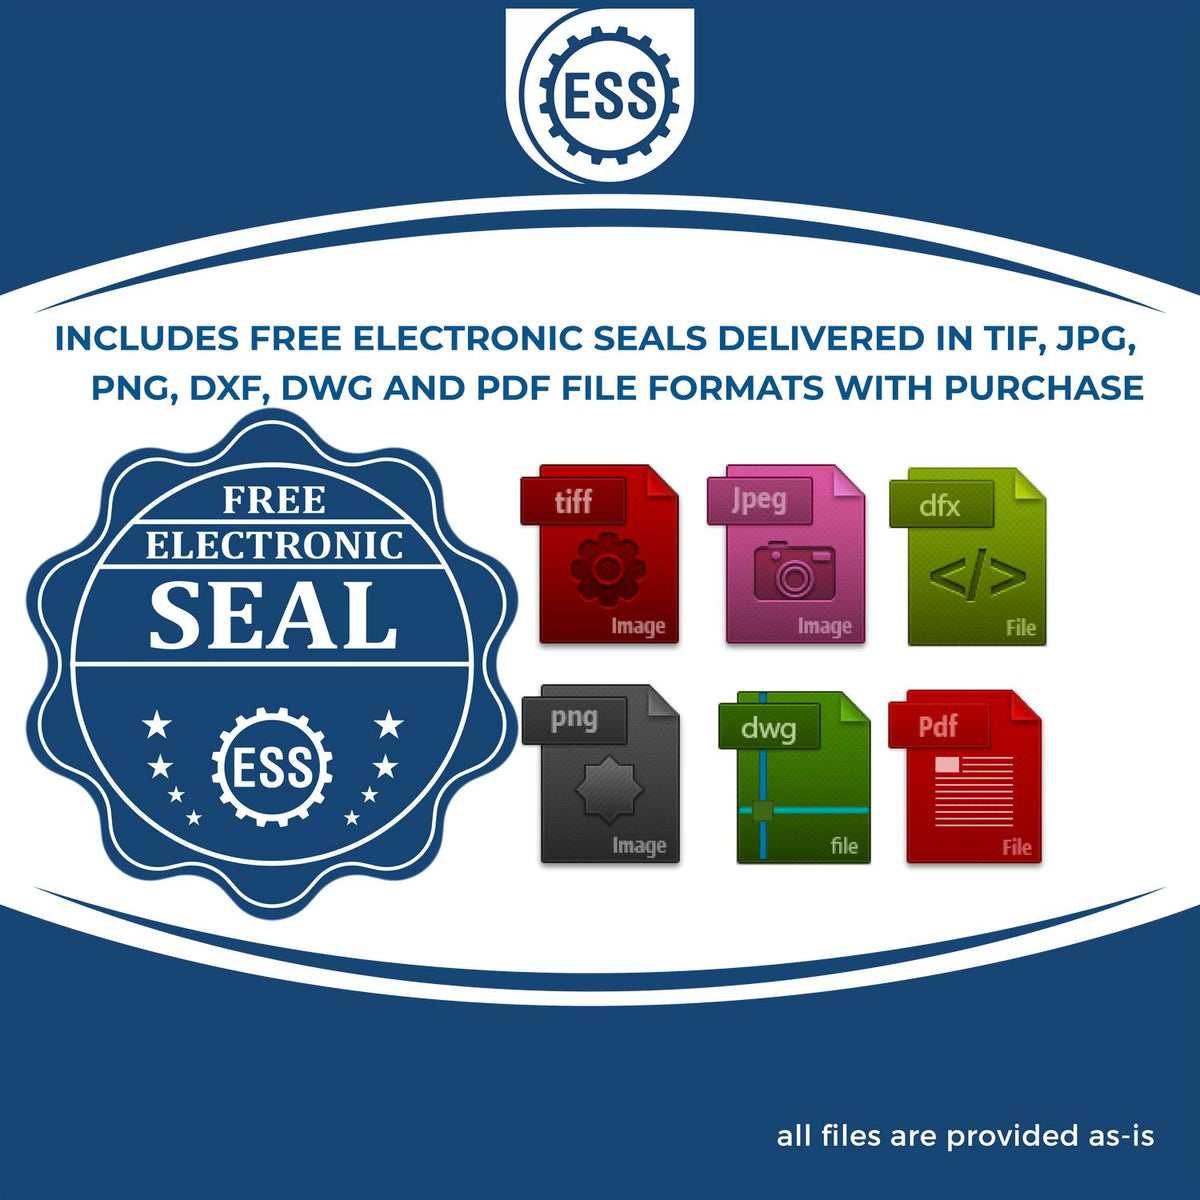 An infographic for the free electronic seal for the Premium MaxLight Pre-Inked Iowa Engineering Stamp illustrating the different file type icons such as DXF, DWG, TIF, JPG and PNG.